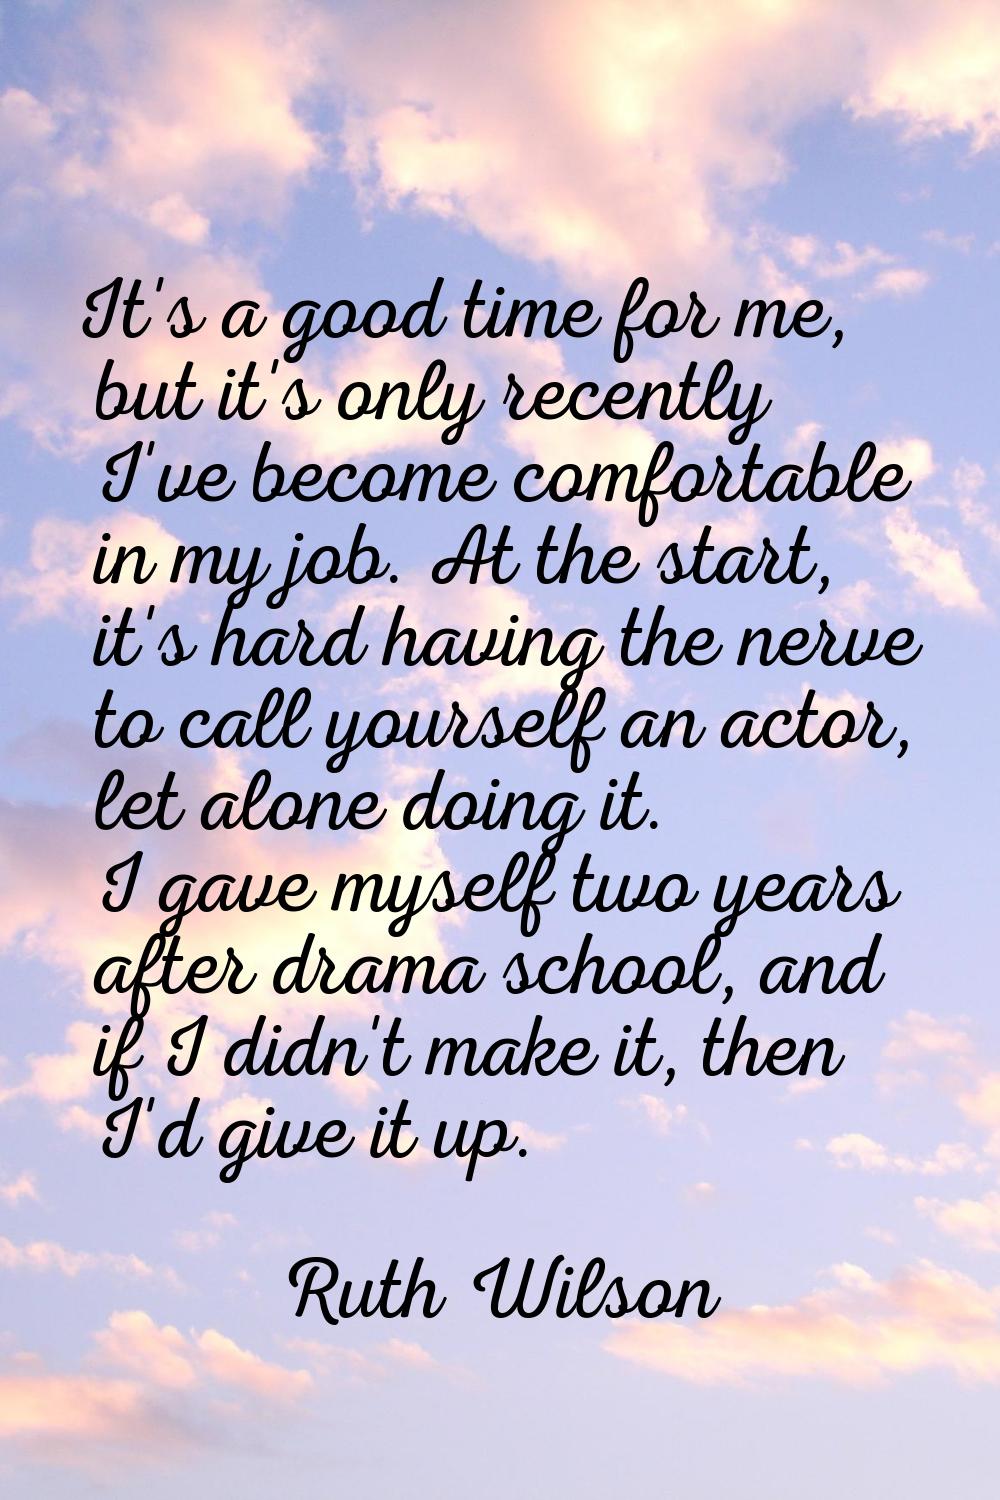 It's a good time for me, but it's only recently I've become comfortable in my job. At the start, it